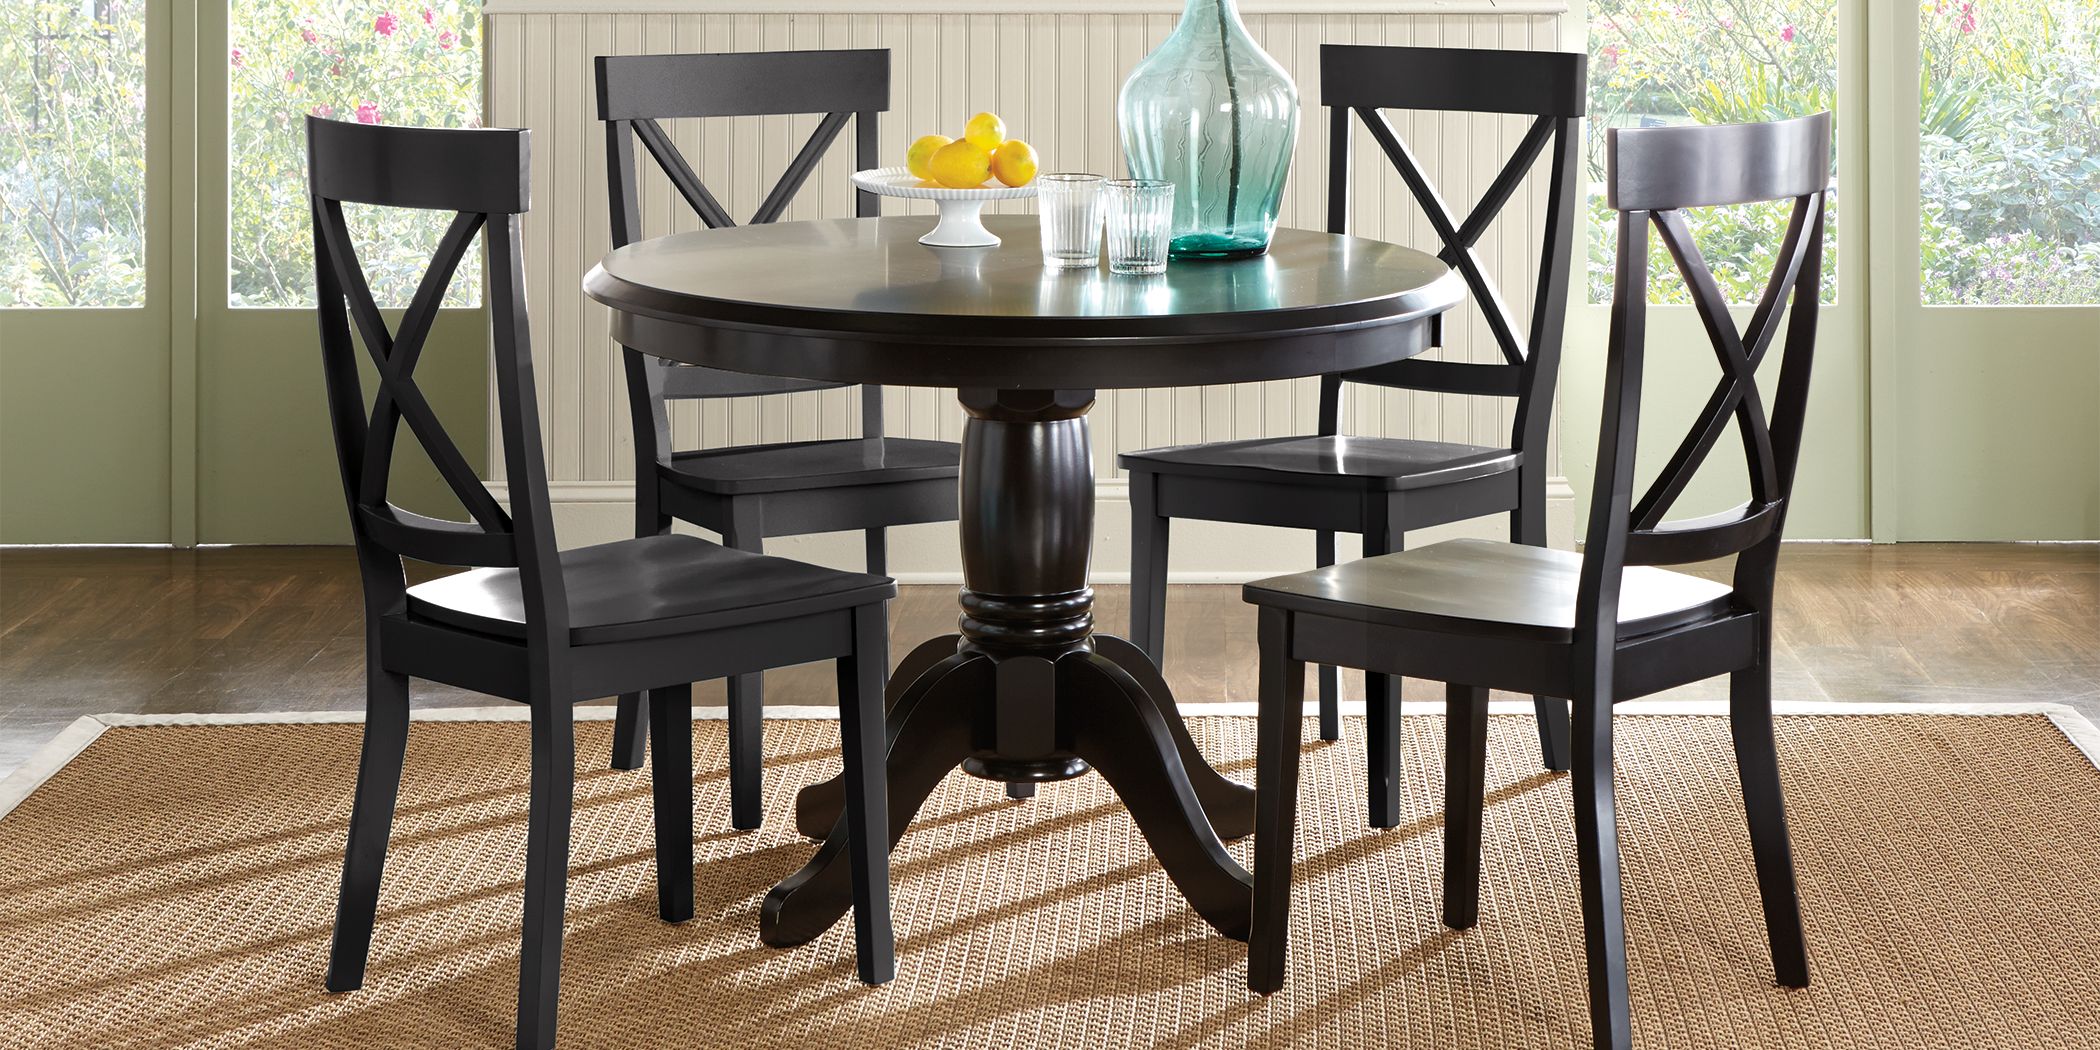 Dining Room Sets, Deals On Dining Room Tables